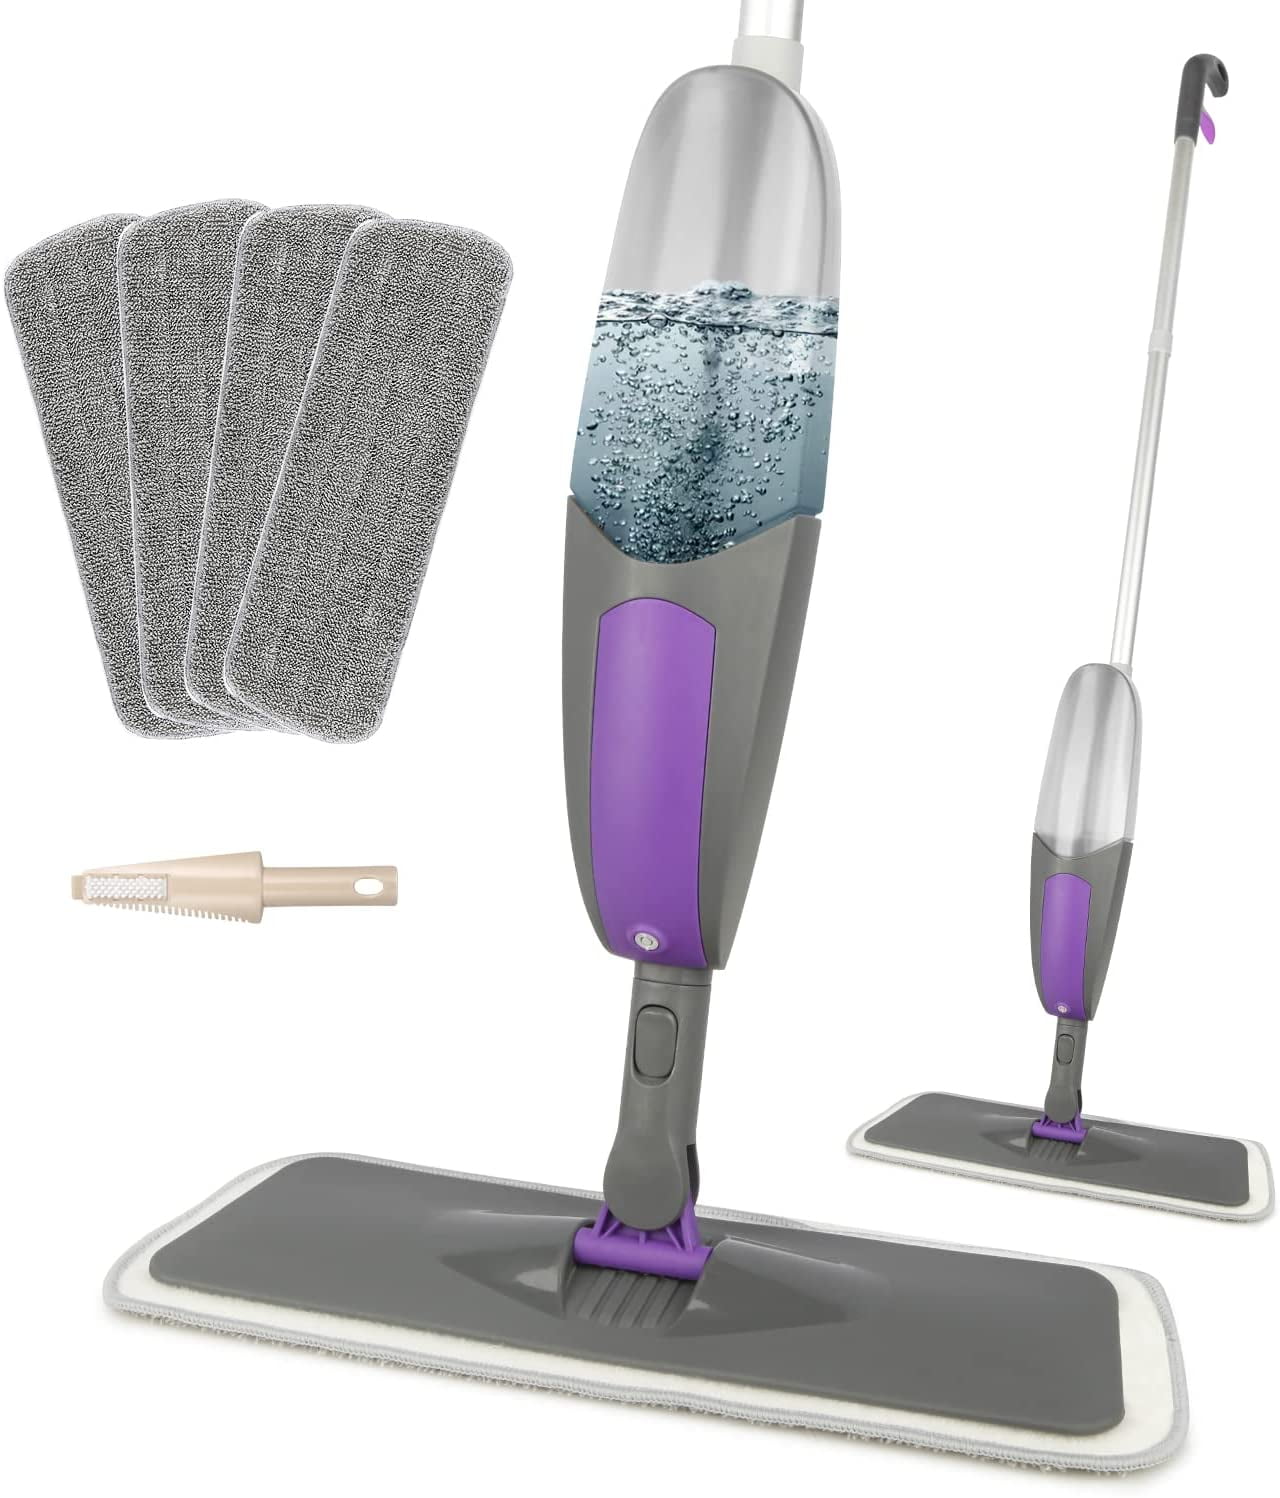 Microfiber Spray Mops for Floors Cleaning,TINA&TONY Dry Dust Mop Wet Mop with Washable Mop Heads,640ML Water Tank and 1 Scraper Floor Mop for Hardwood,Laminate Floors,Ceramic 2 Pack mop Heads